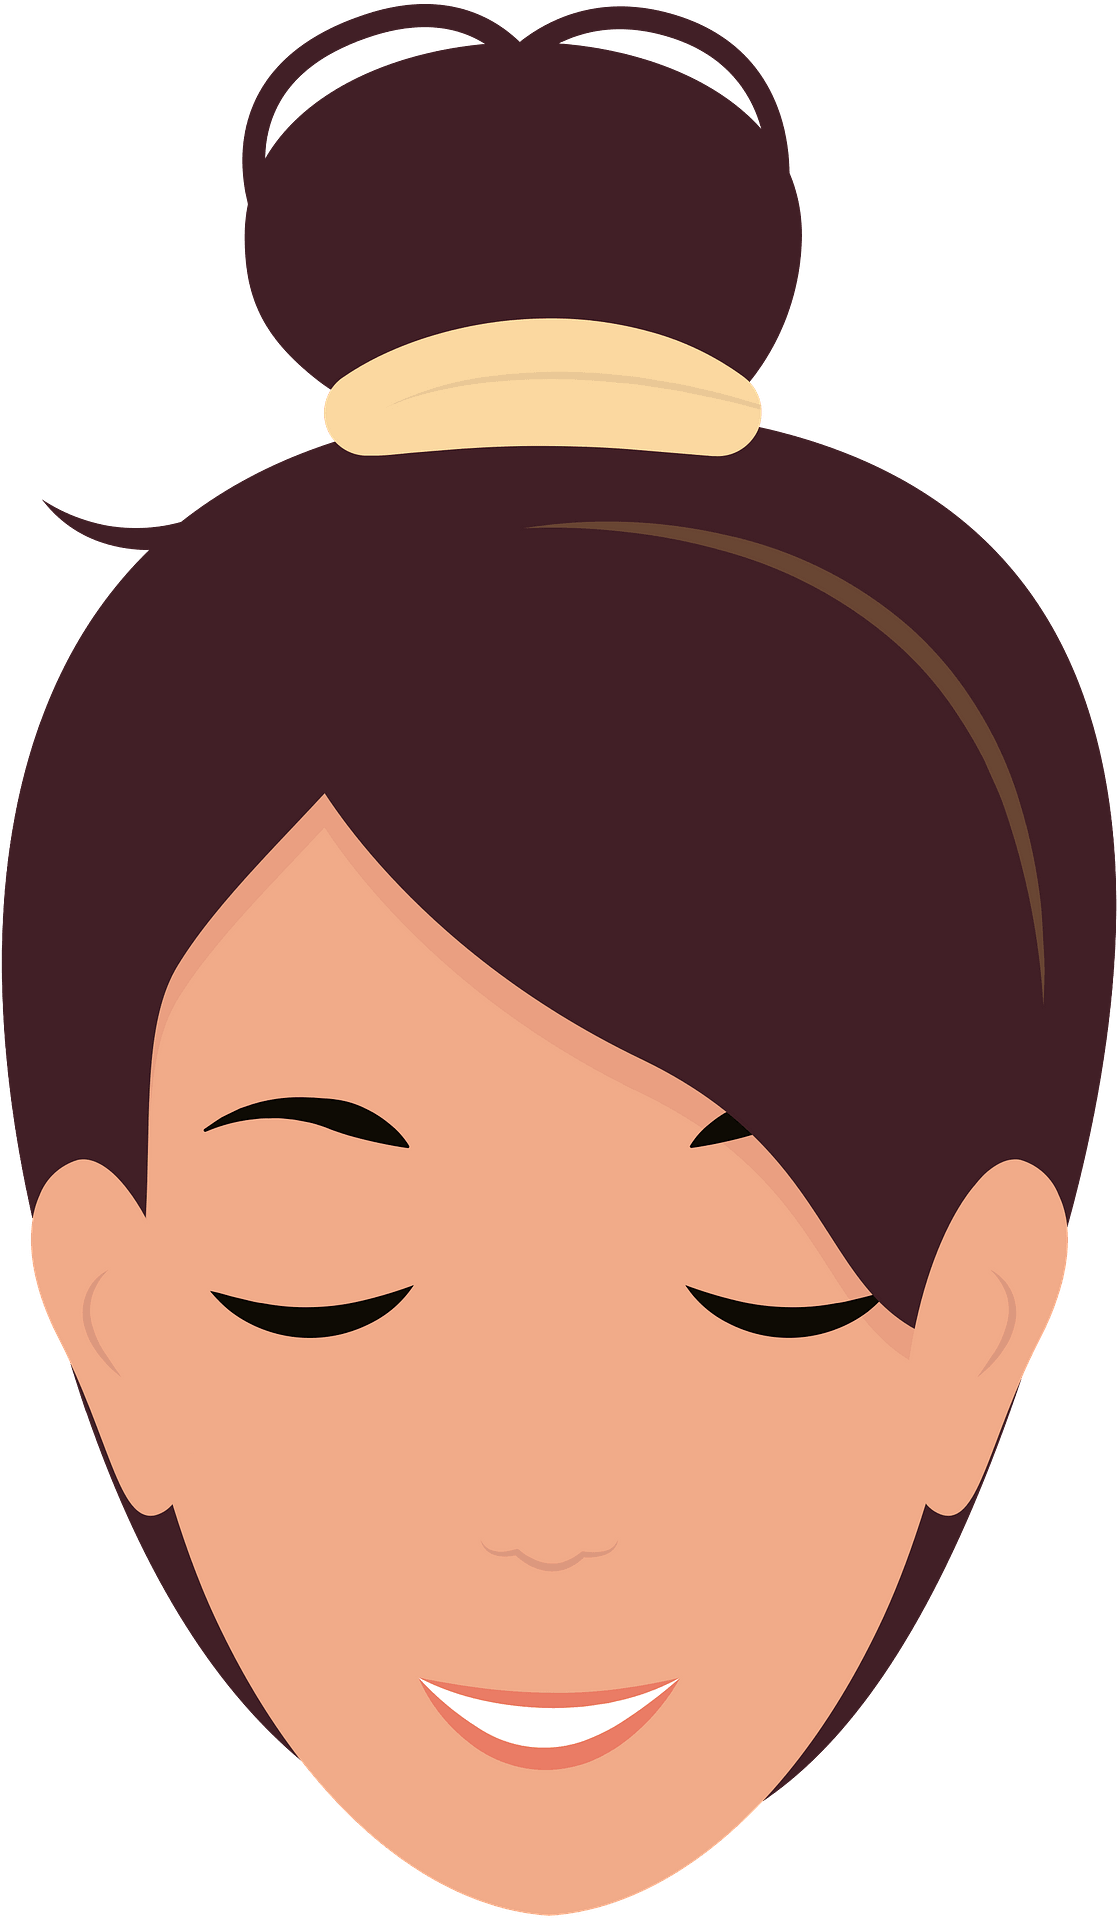 100000 Closed Eyes Vector Images Depositphotos Clip Art Library